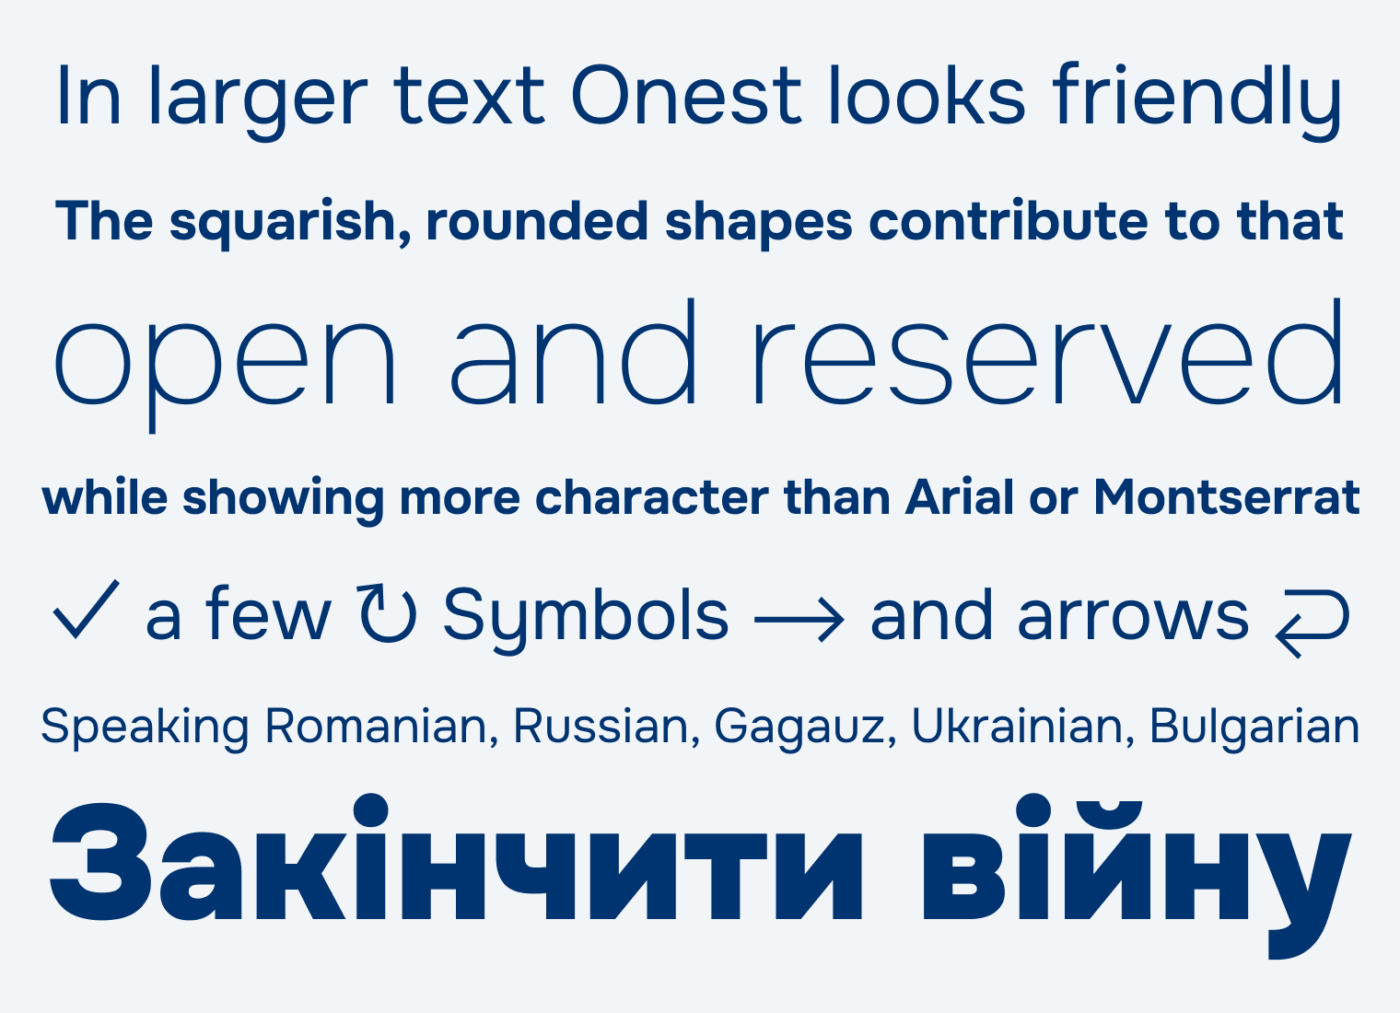 In larger text Onest looks friendly
The squarish, rounded shapes contribute to that open and reserved
while showing more character than Arial or Montserrat a few Symbols and arrows 
Speaking Romanian, Russian, Gagauz, Ukrainian, Bulgarian
Закінчити війну